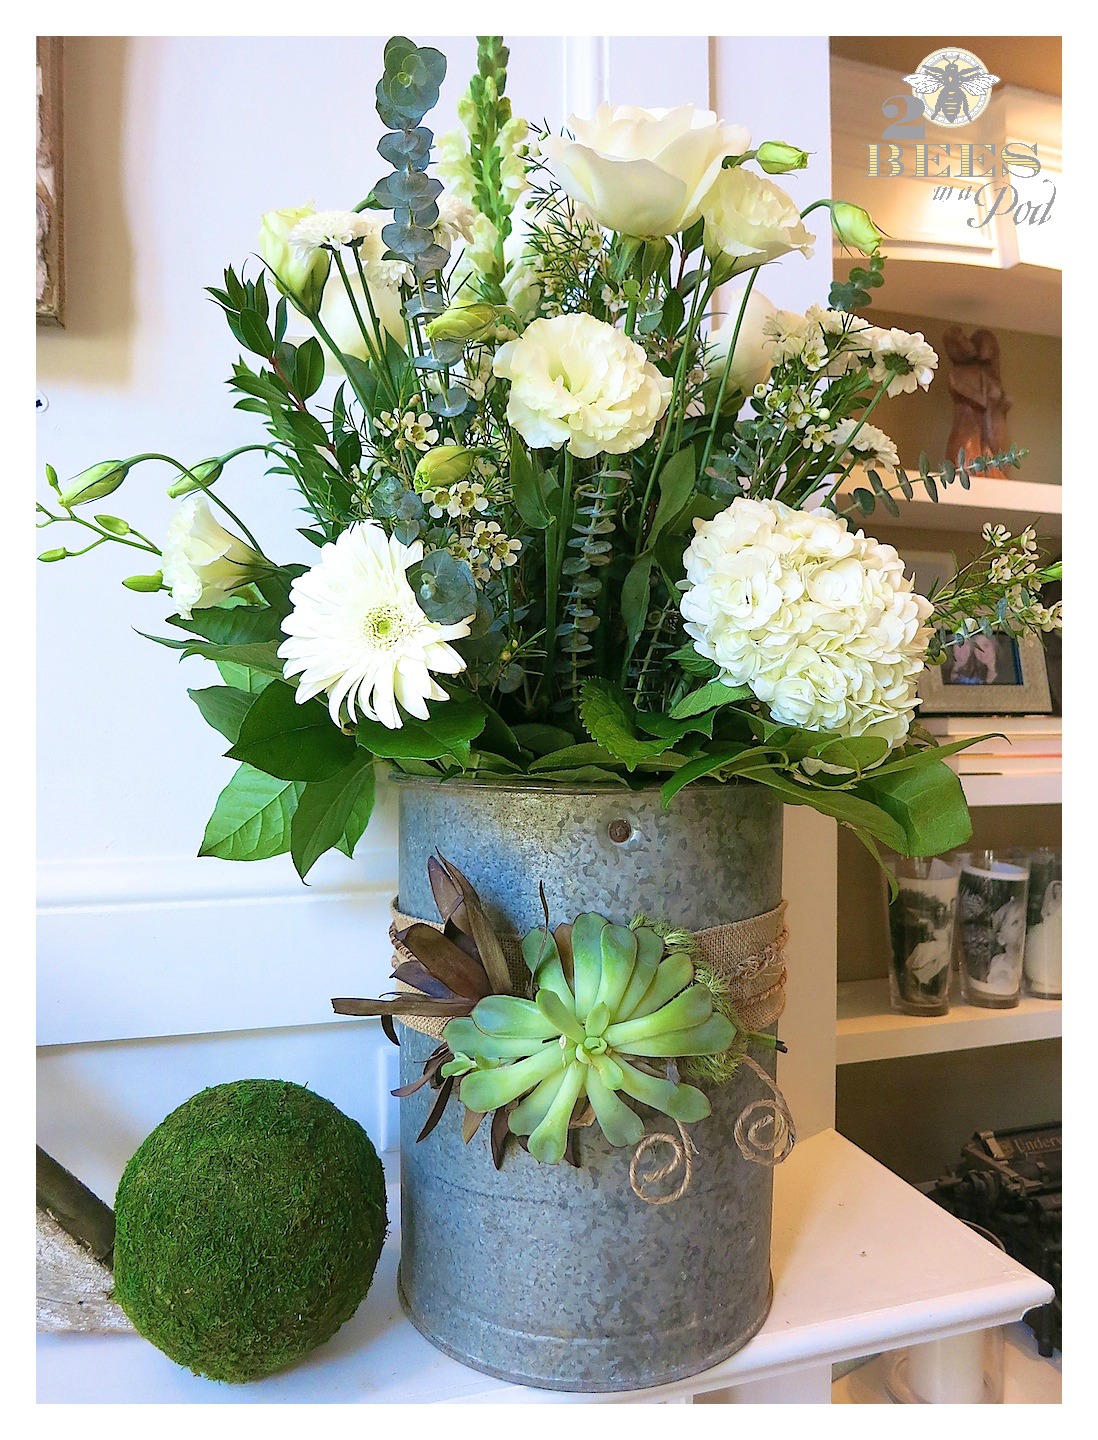 Spring Mantle Update - bright turquoise and vintage, weathered decor. Fresh white flowers, bunny, moss, bird nest